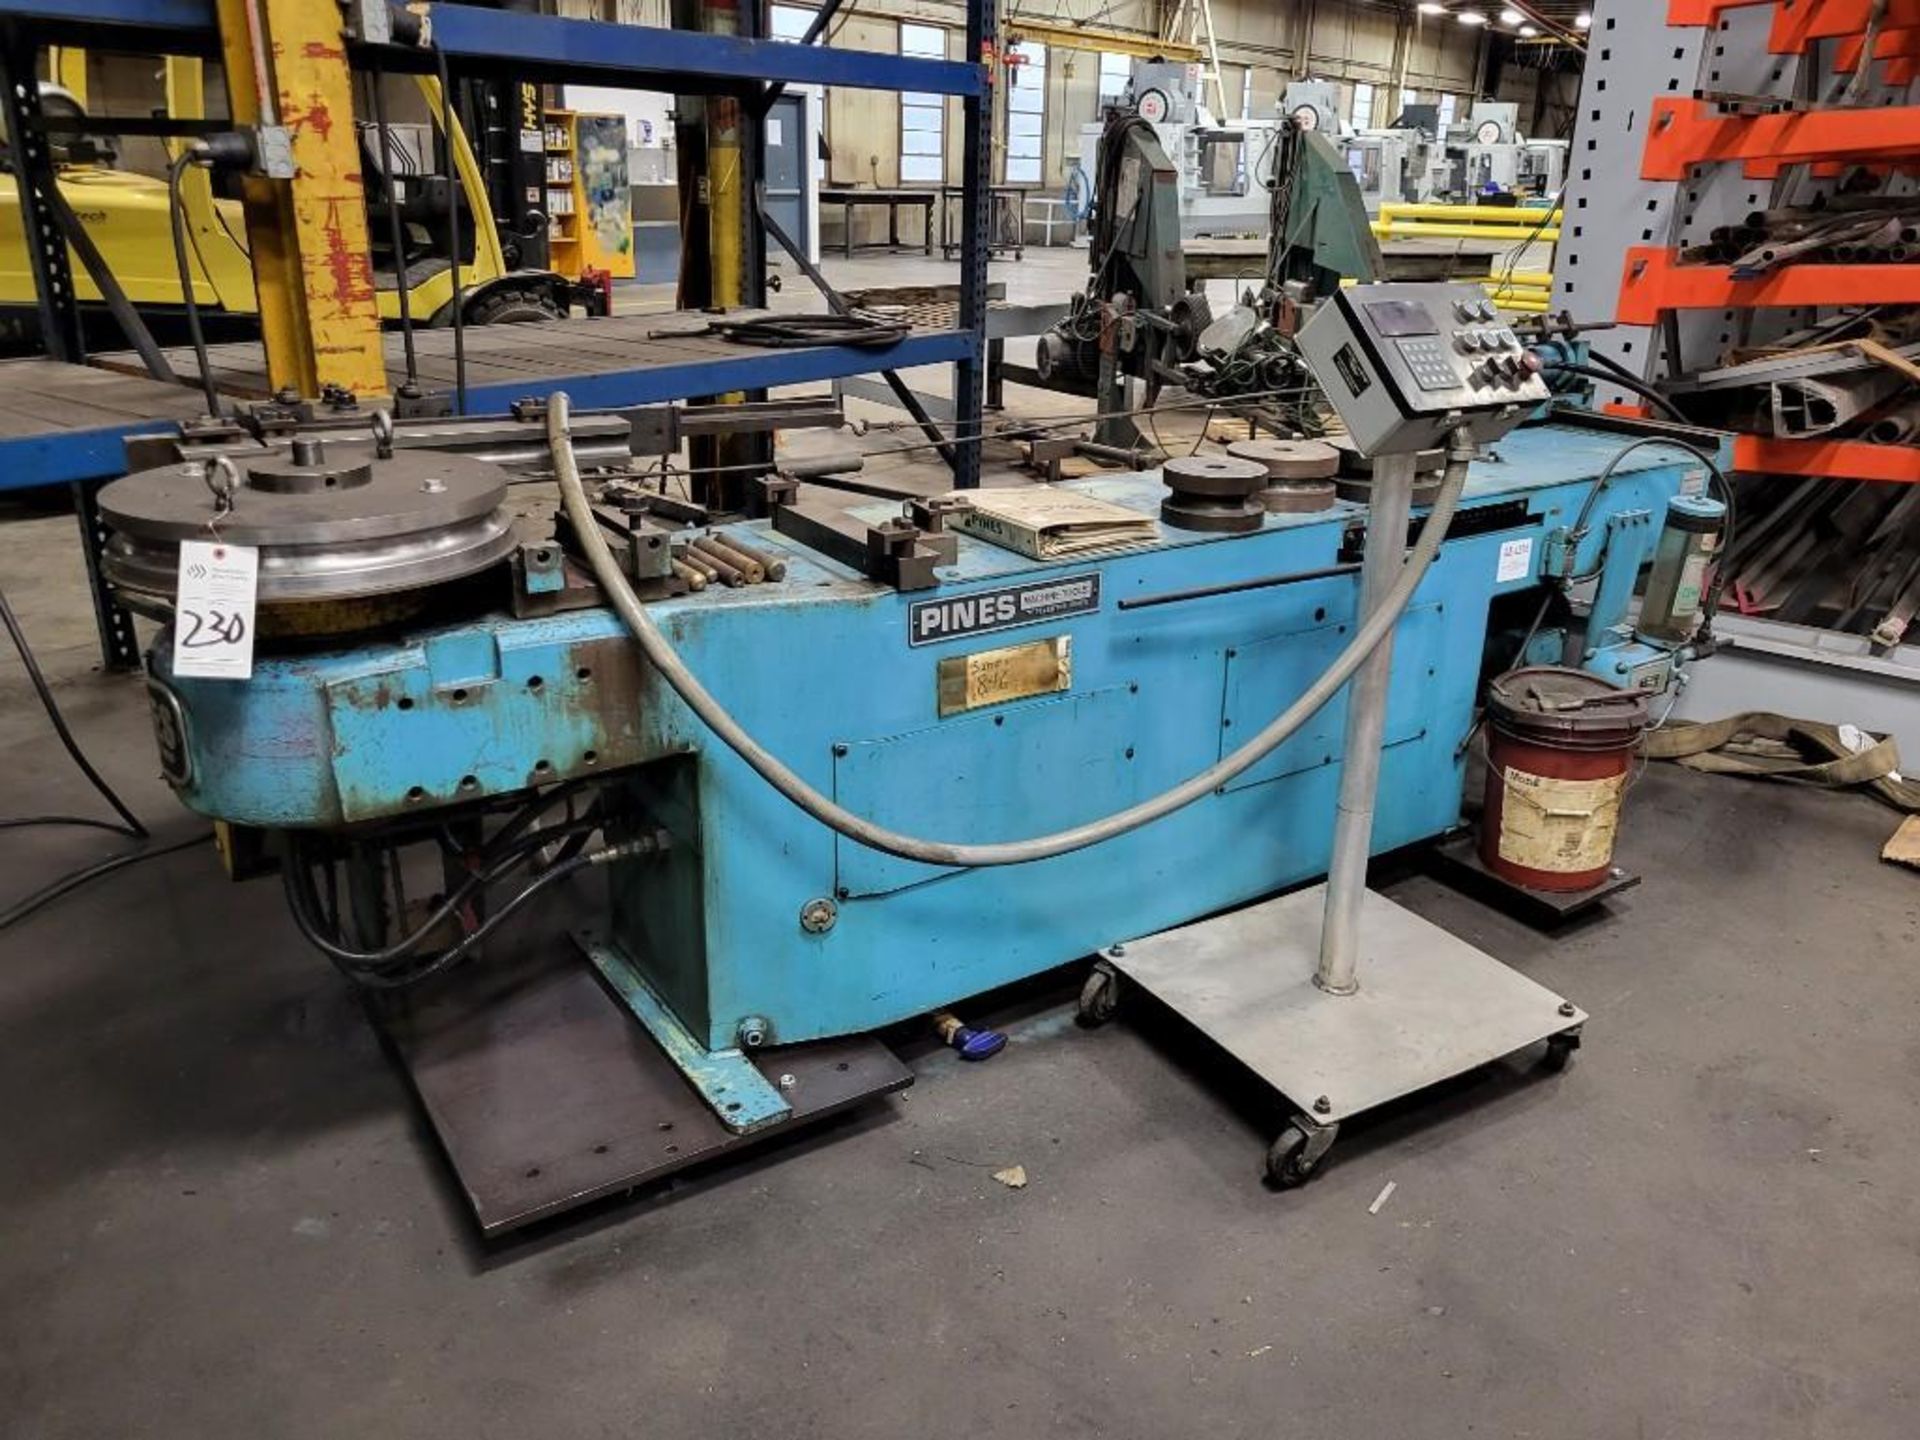 TELEDYNE PINES M-64688 TUBE BENDER WITH LOTS OF TOOLING